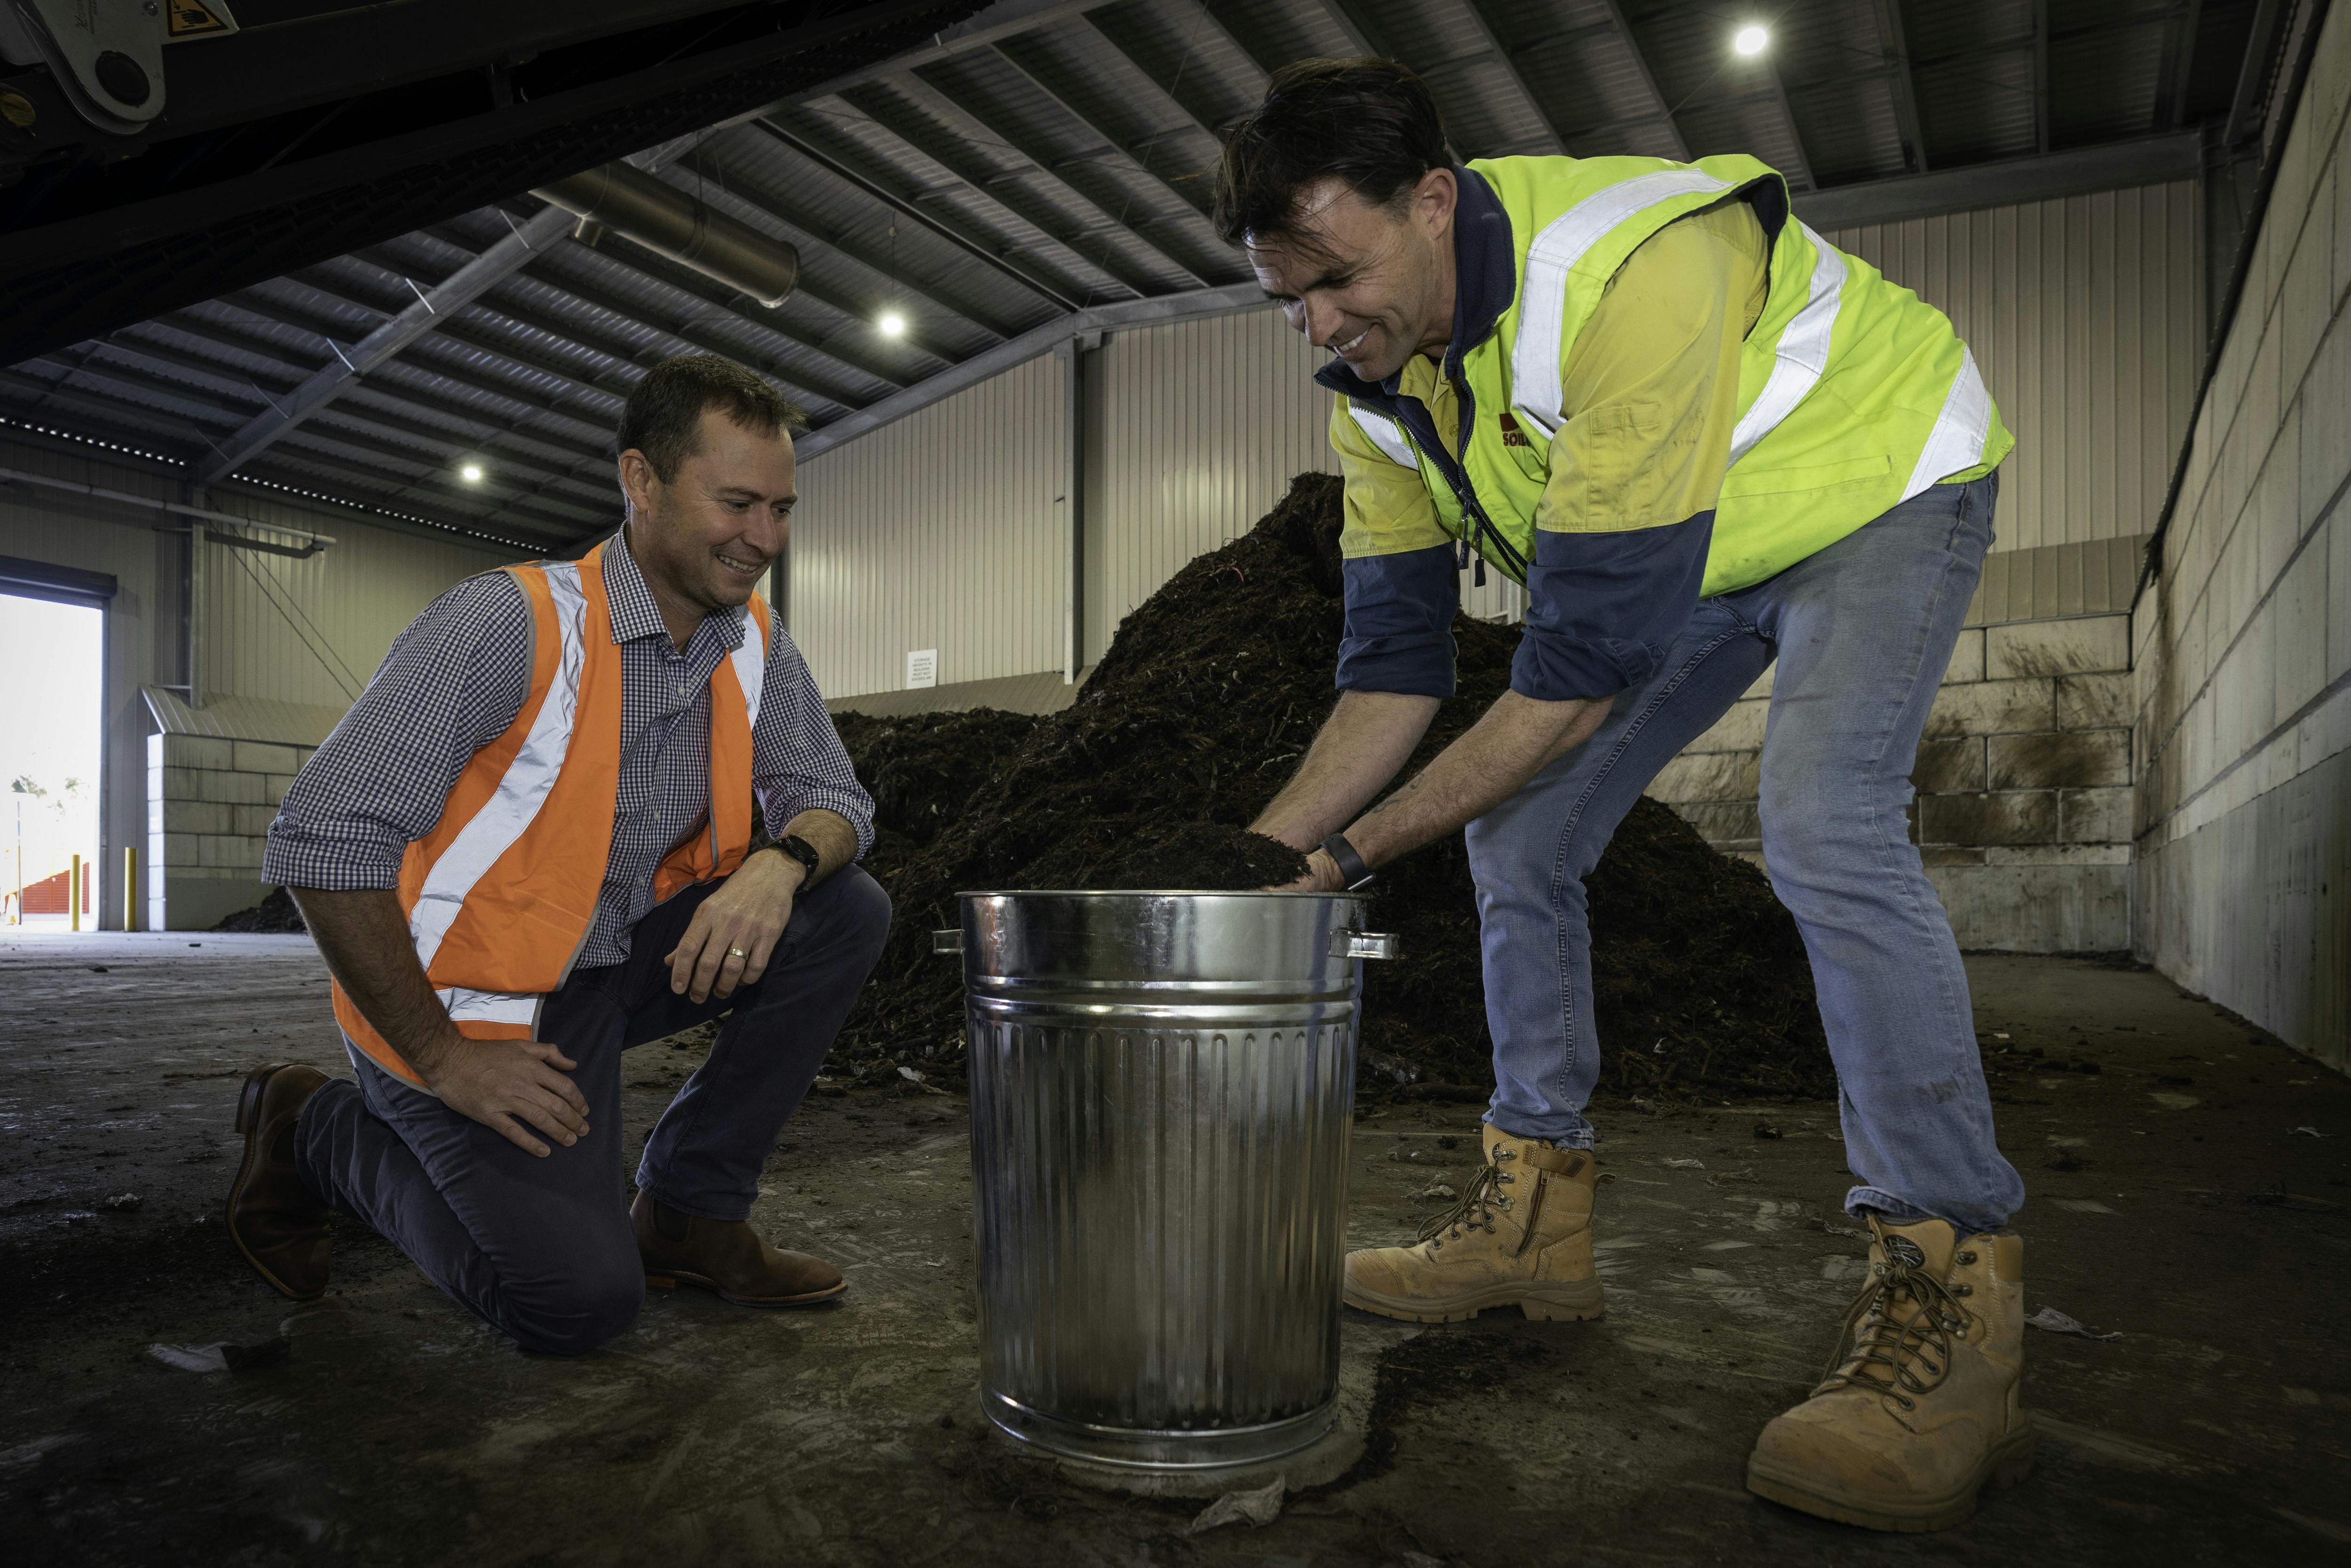 Council's Acting Project & Operations Officer Wes Knight and Soilco Operations Manager Mark Emery inspecting some of the processed compost